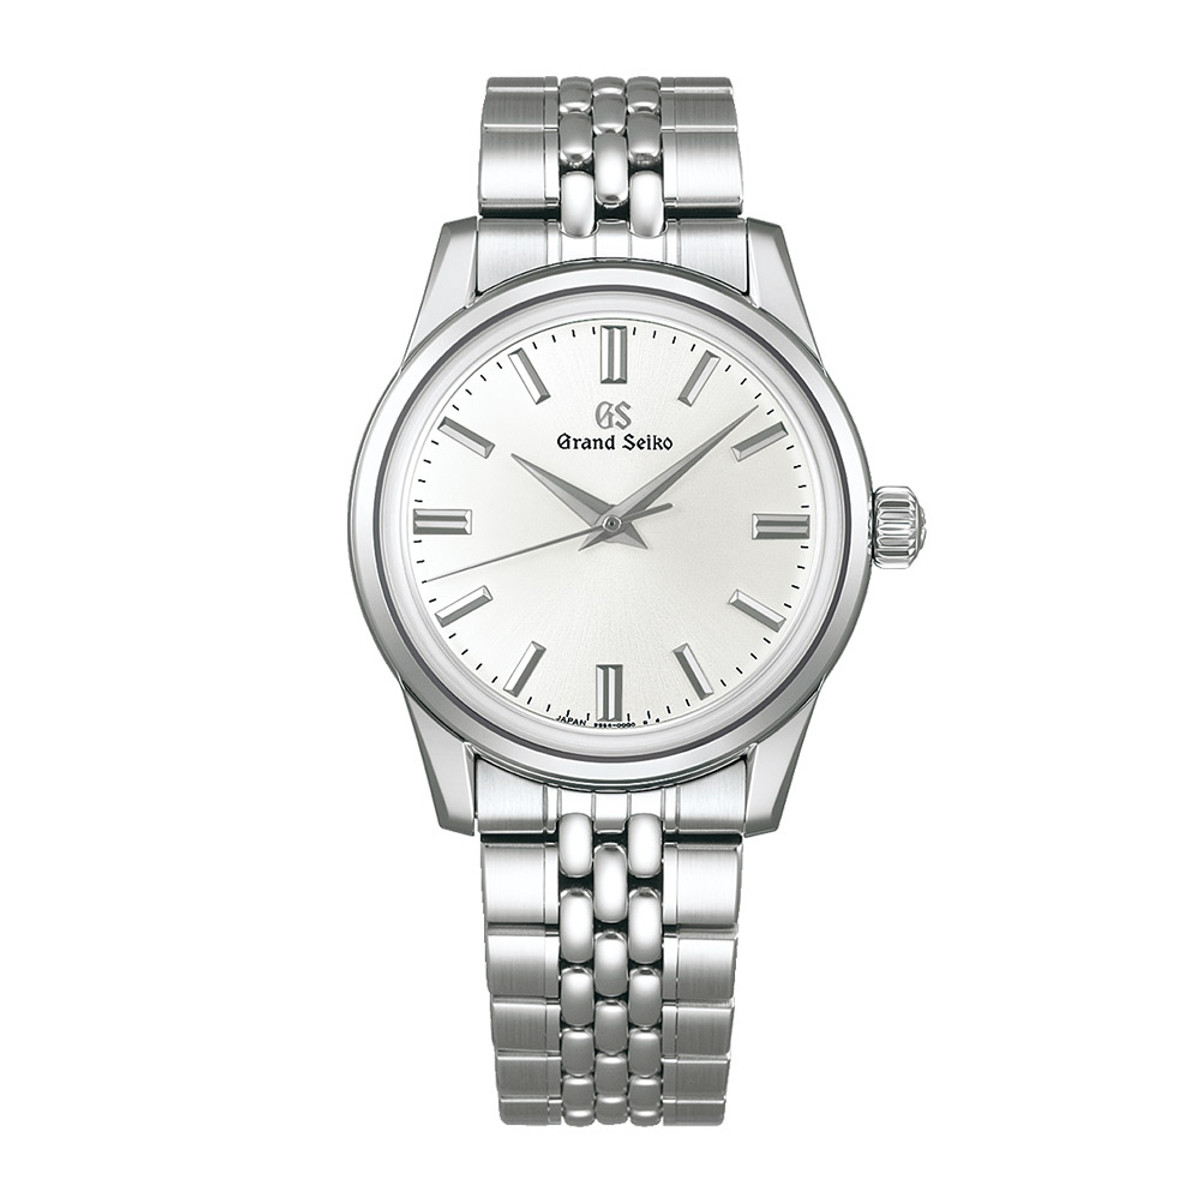 Grand Seiko Elegance Collection SBGW305-61429 Product Image